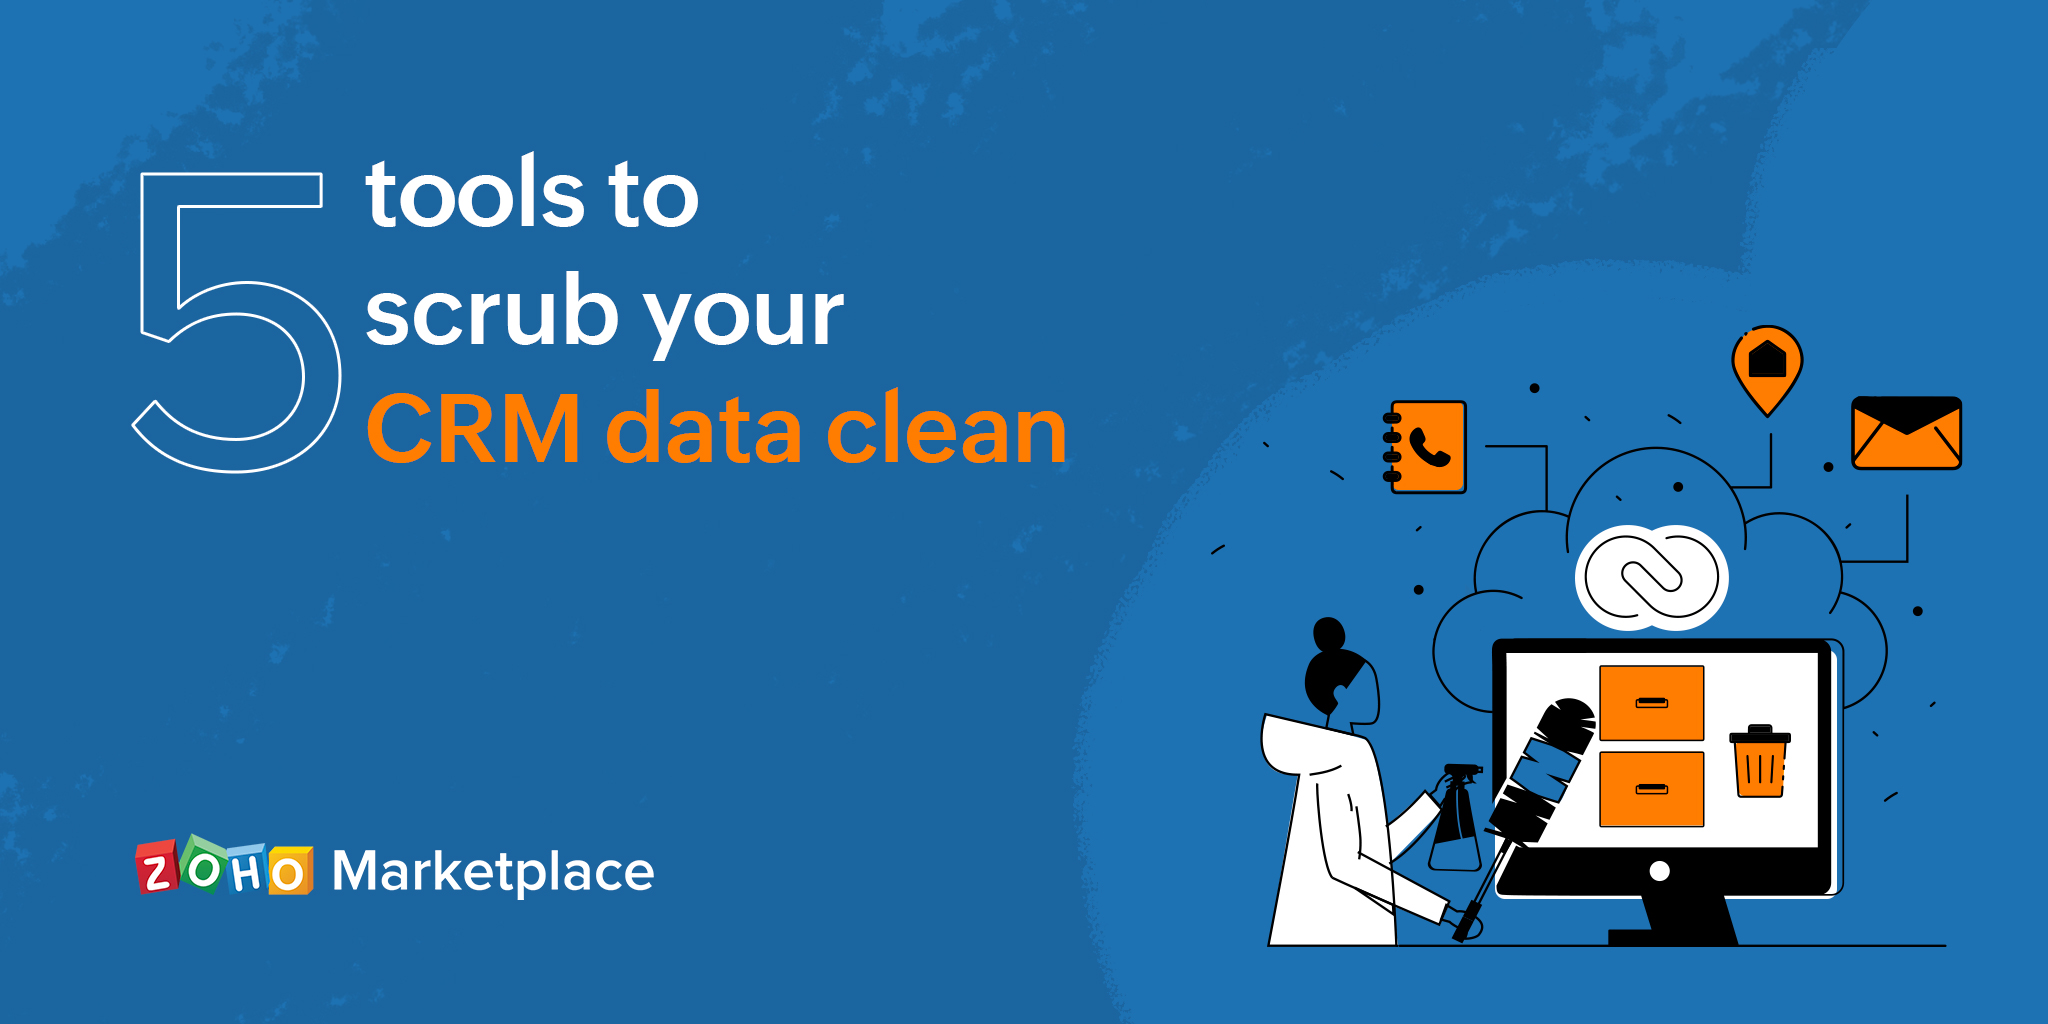 5 tools to scrub your CRM data clean